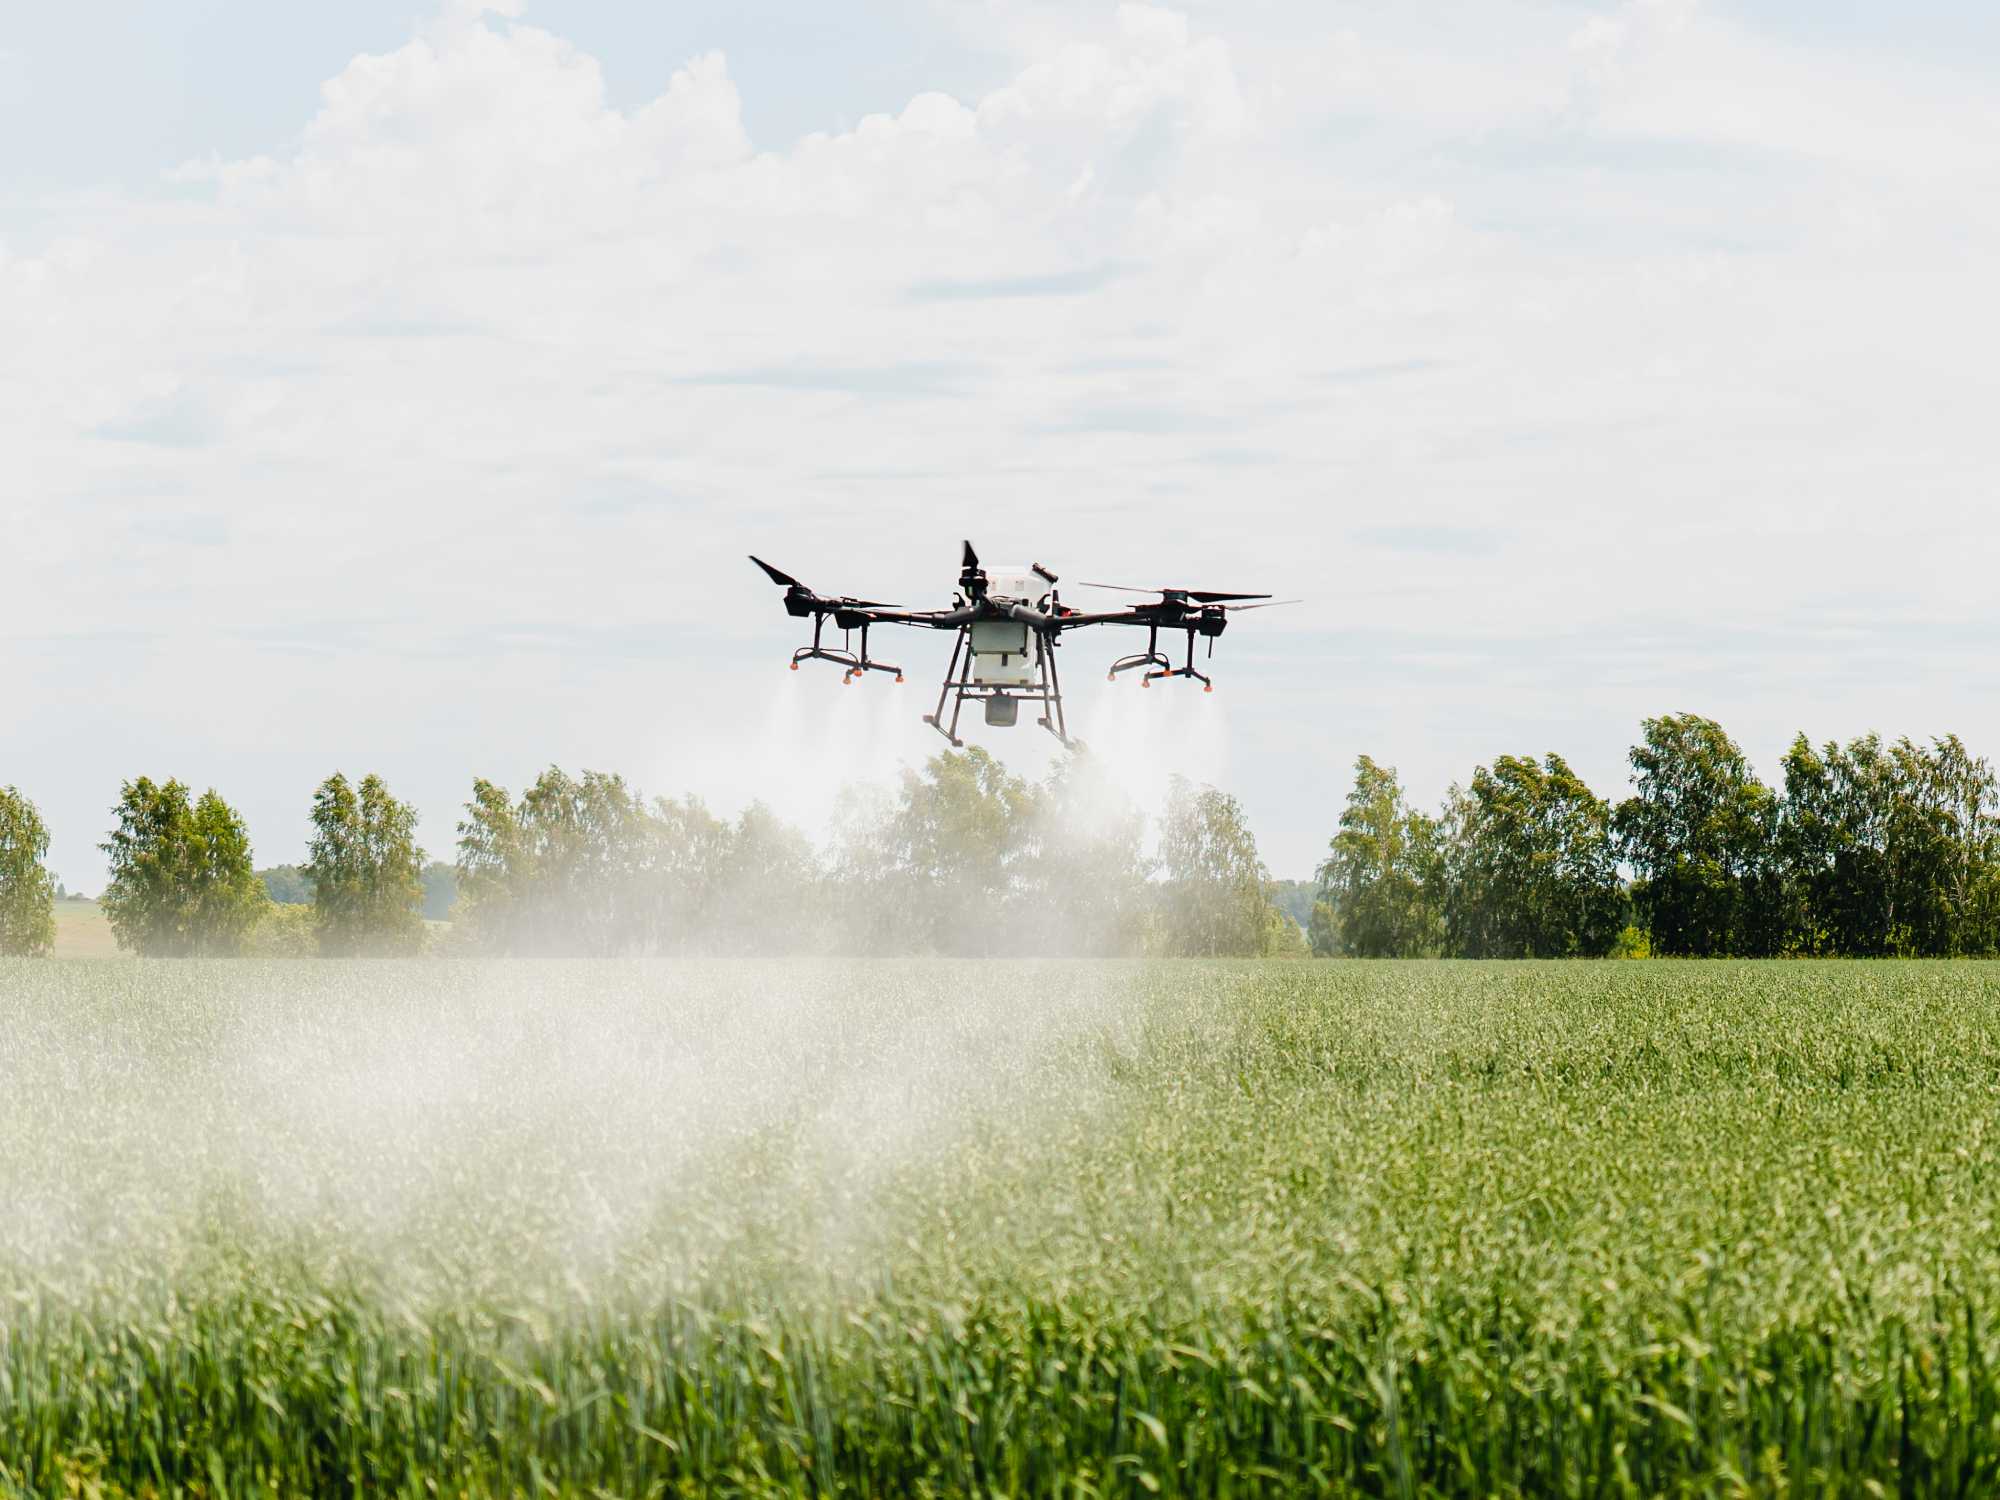 An agricultural drone is flying over a green farm field. The drone is spraying a substance onto the field.